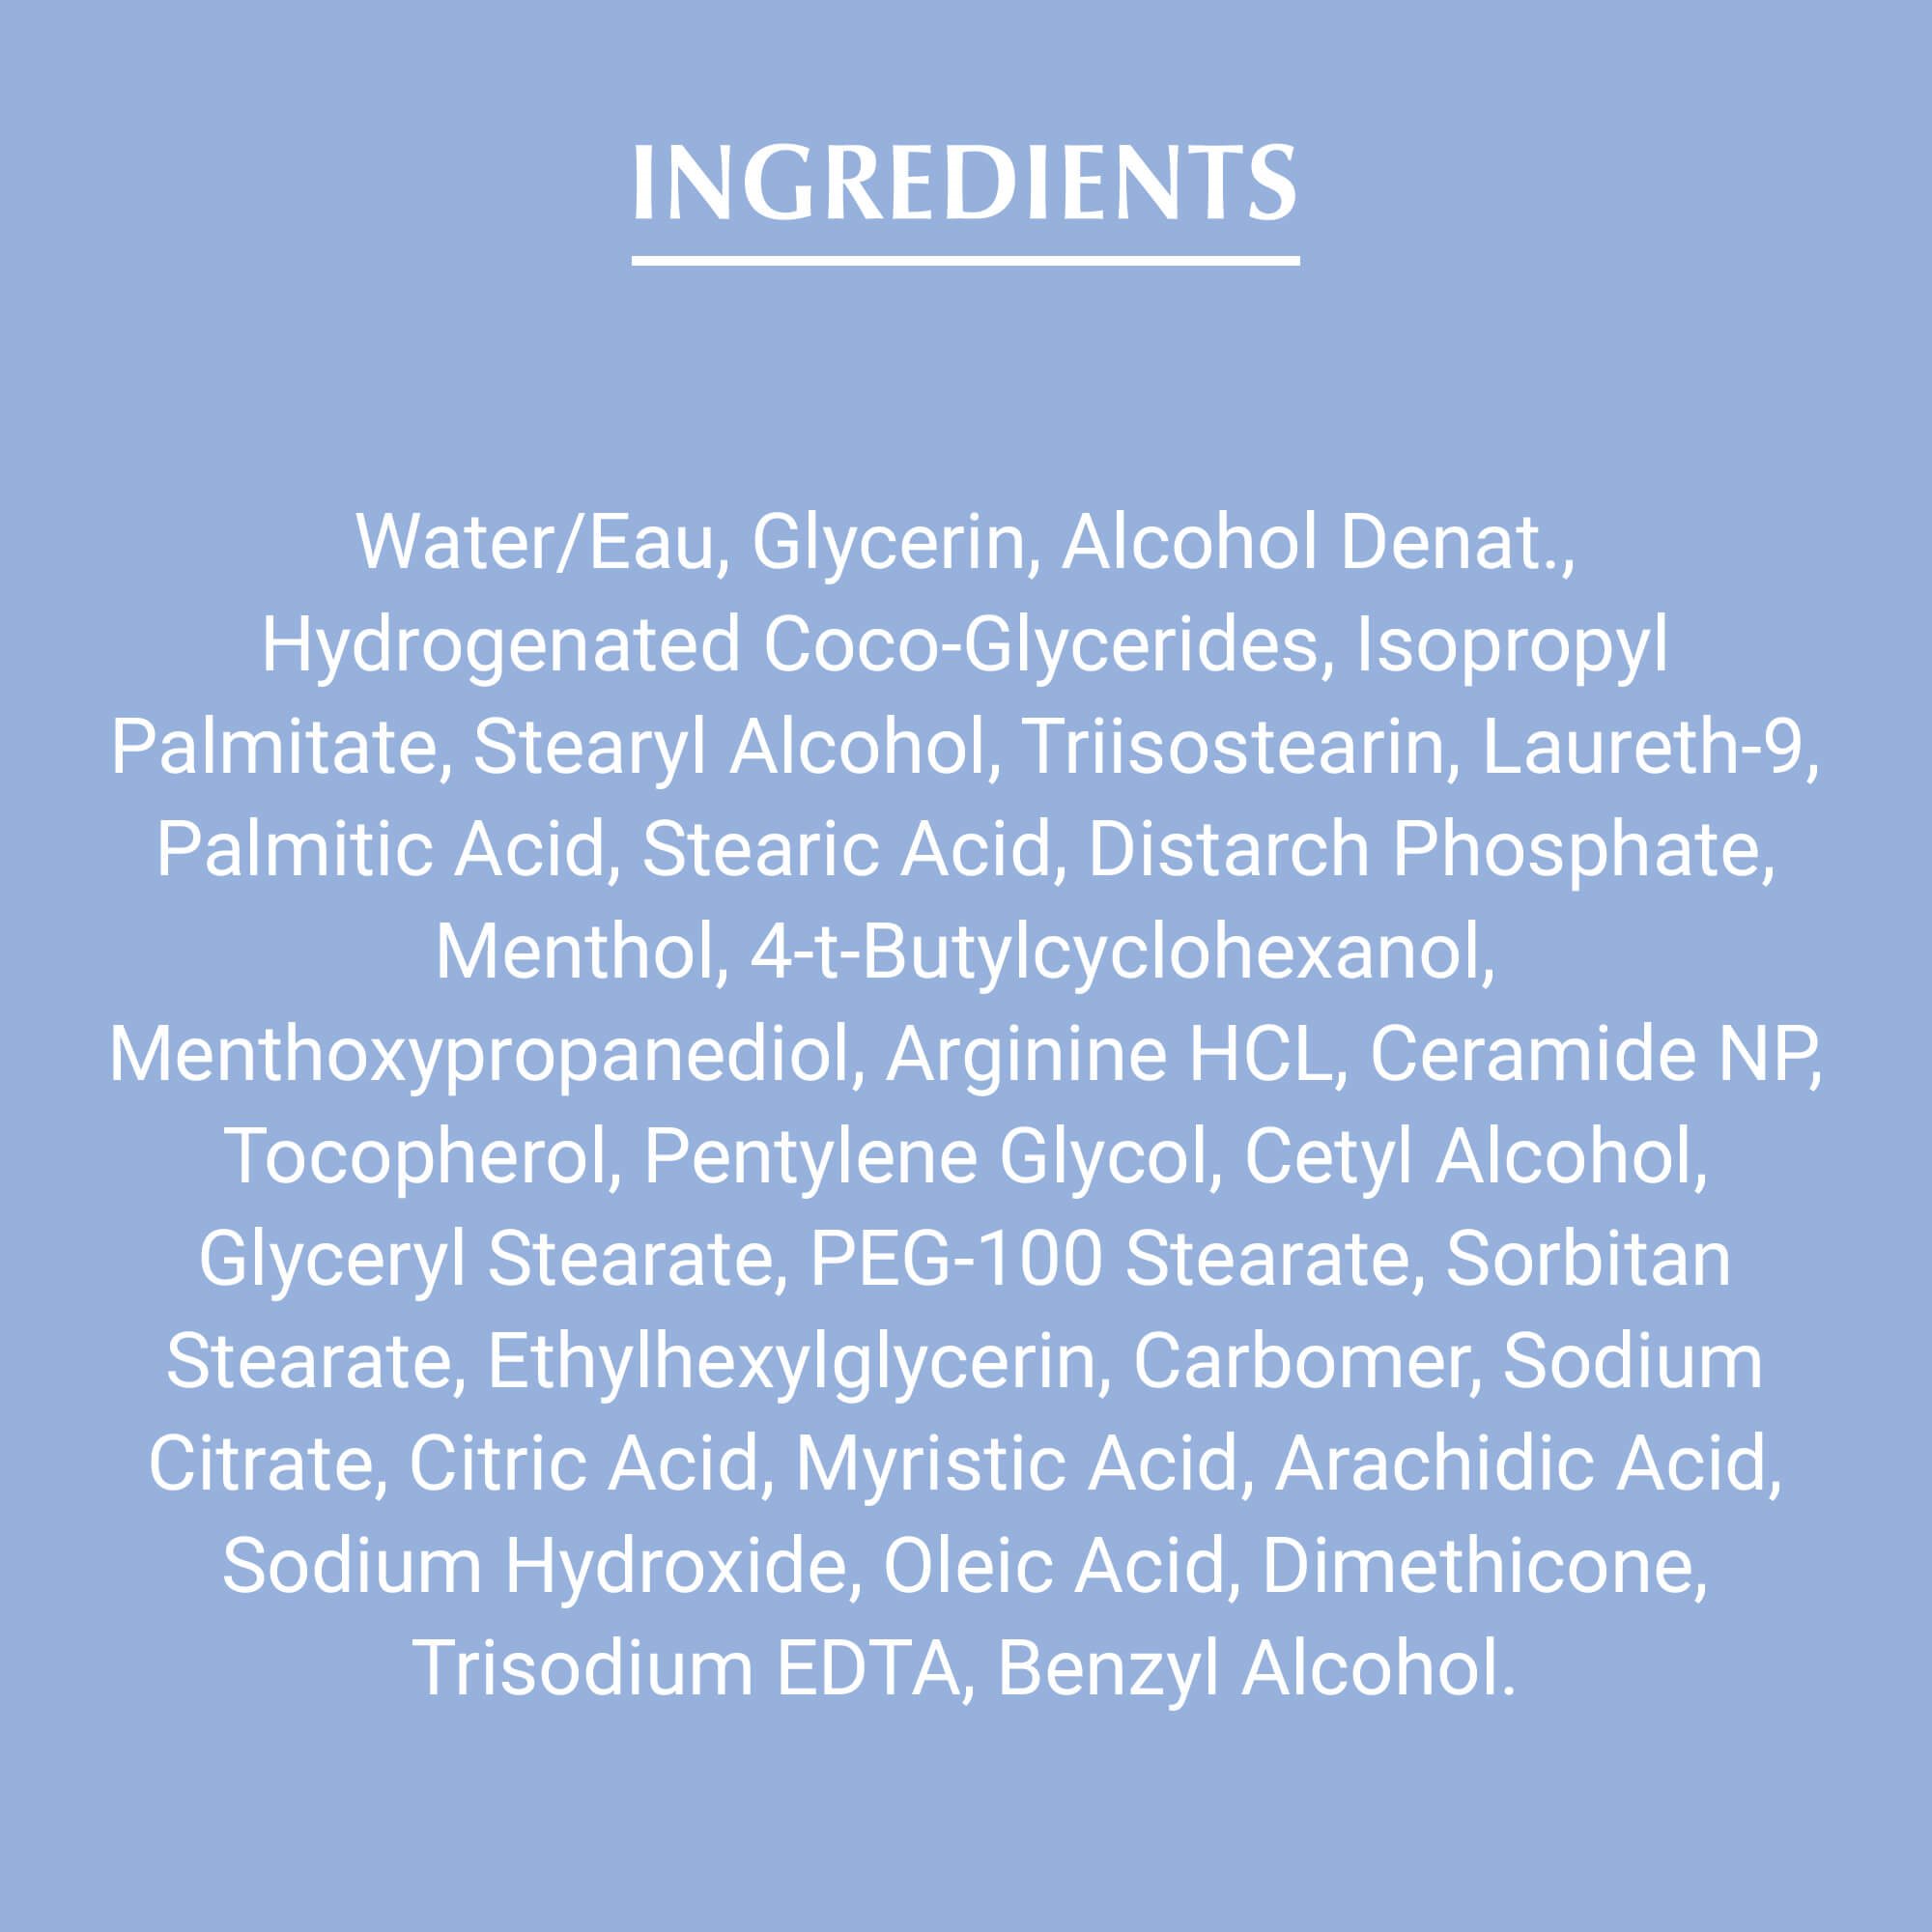 Eucerin Calming Lotion product ingredients list text in white font against a blue background.